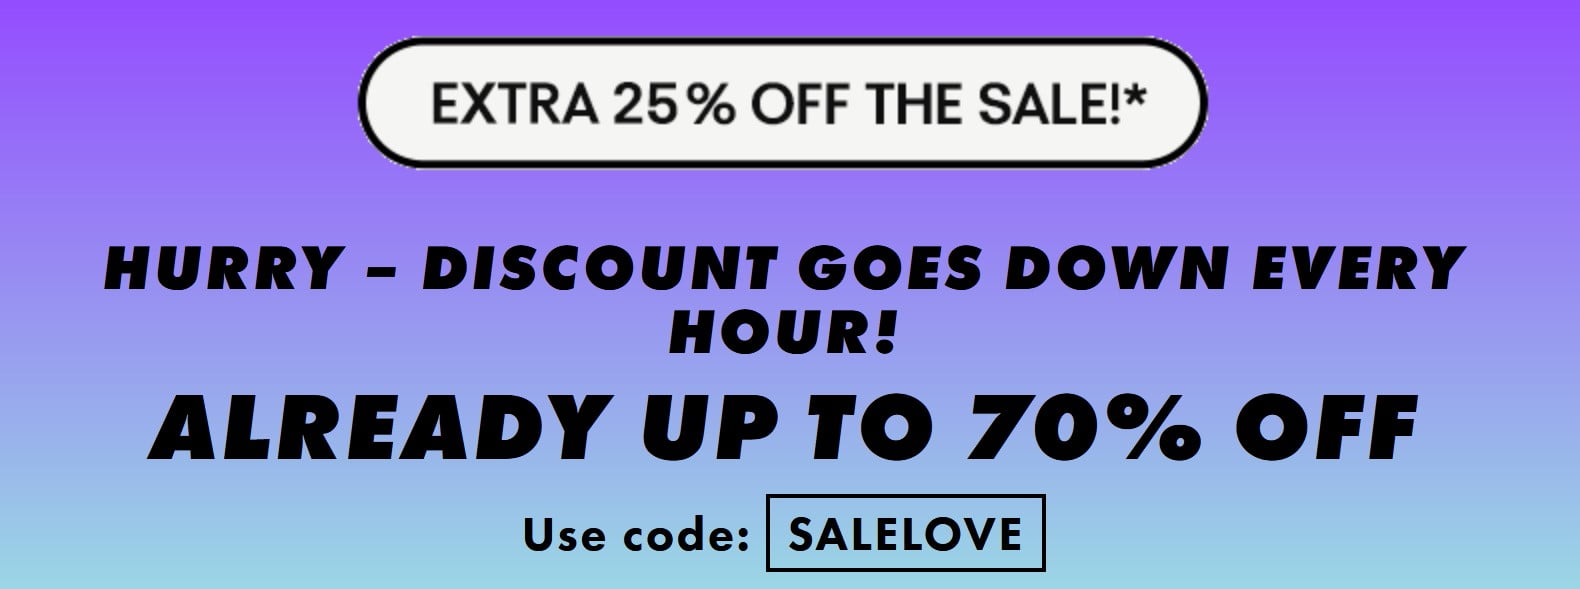 Up to an extra 25% off sale at ASOS